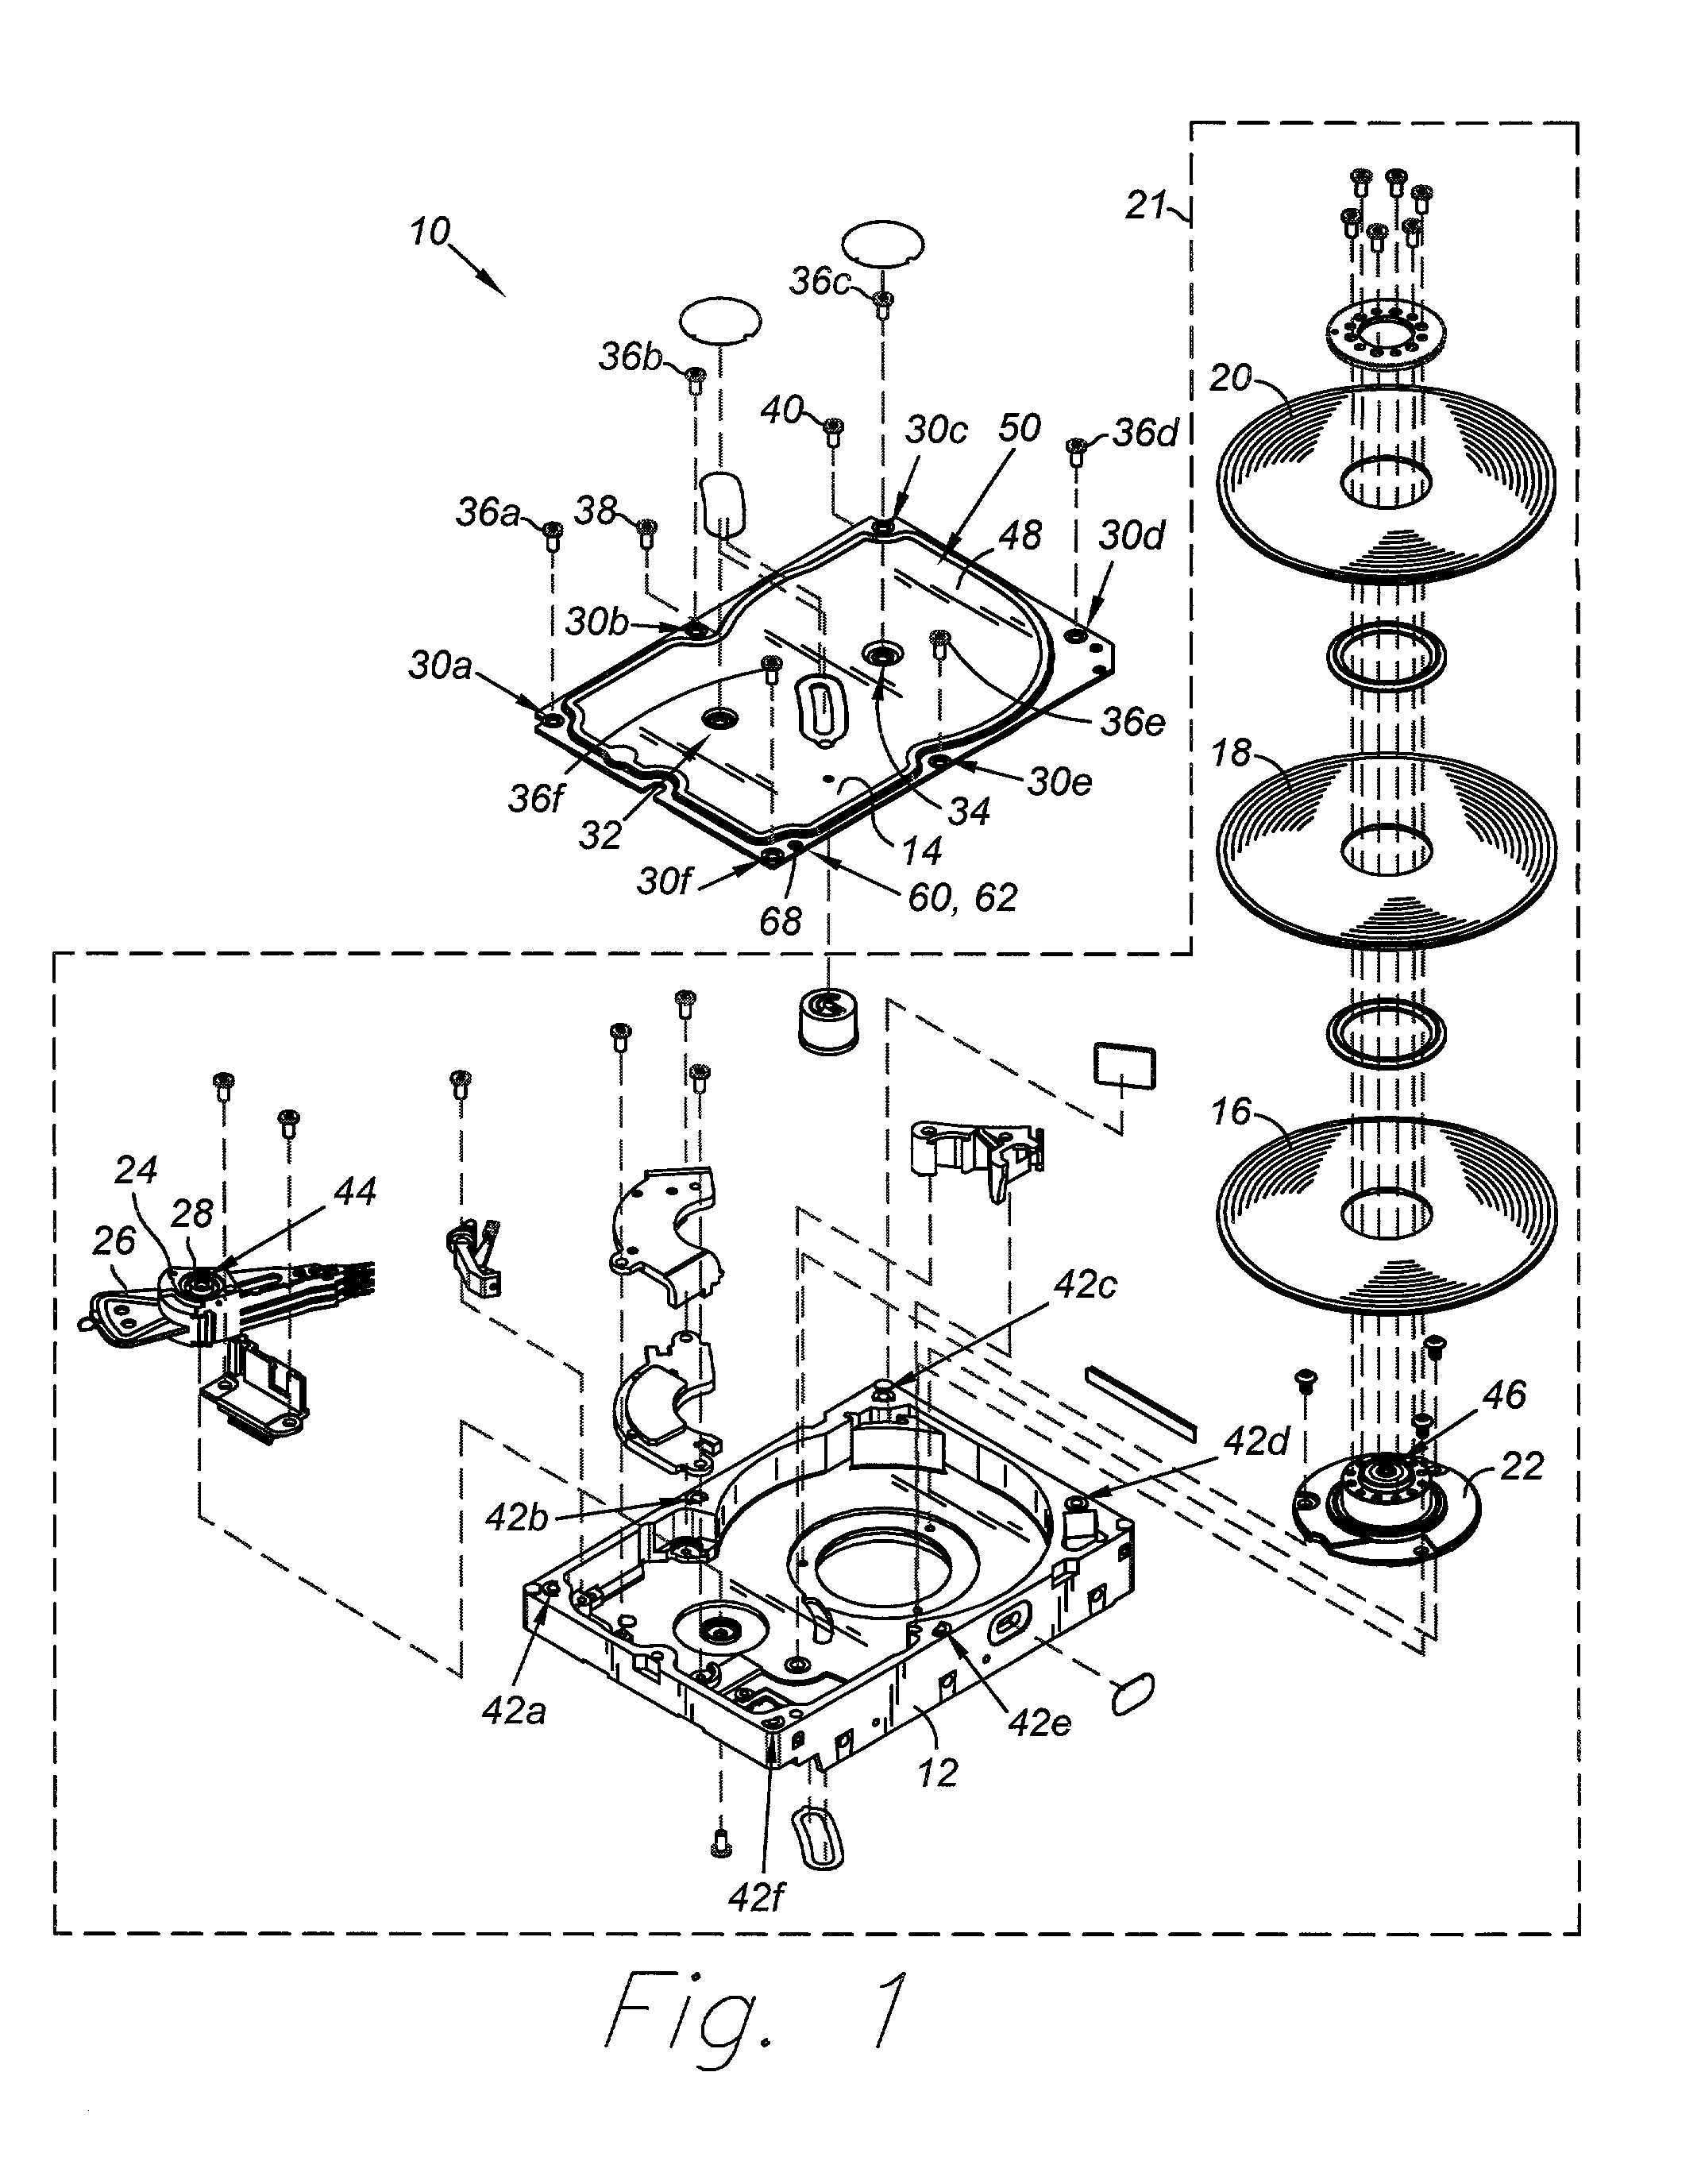 Method of assembling a disk drive by electrically grounding a disk drive cover